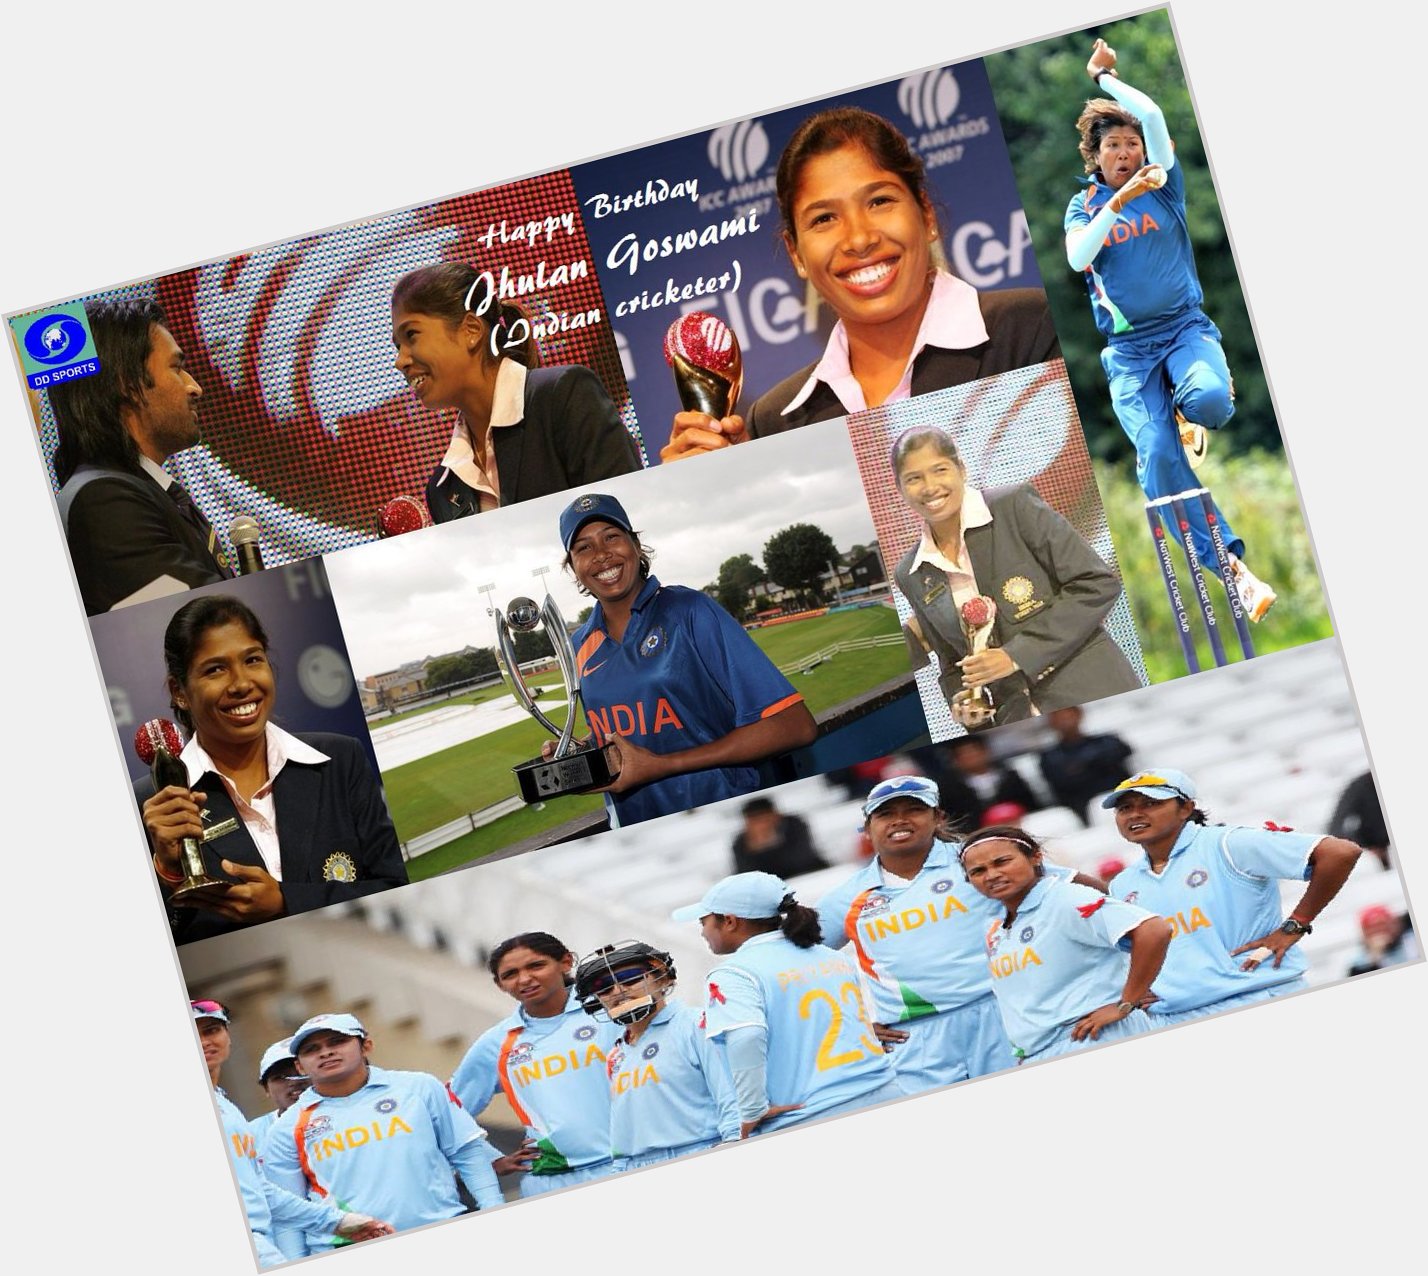 DD Sports wishes the  team Jhulan Goswami a very Happy Birthday   